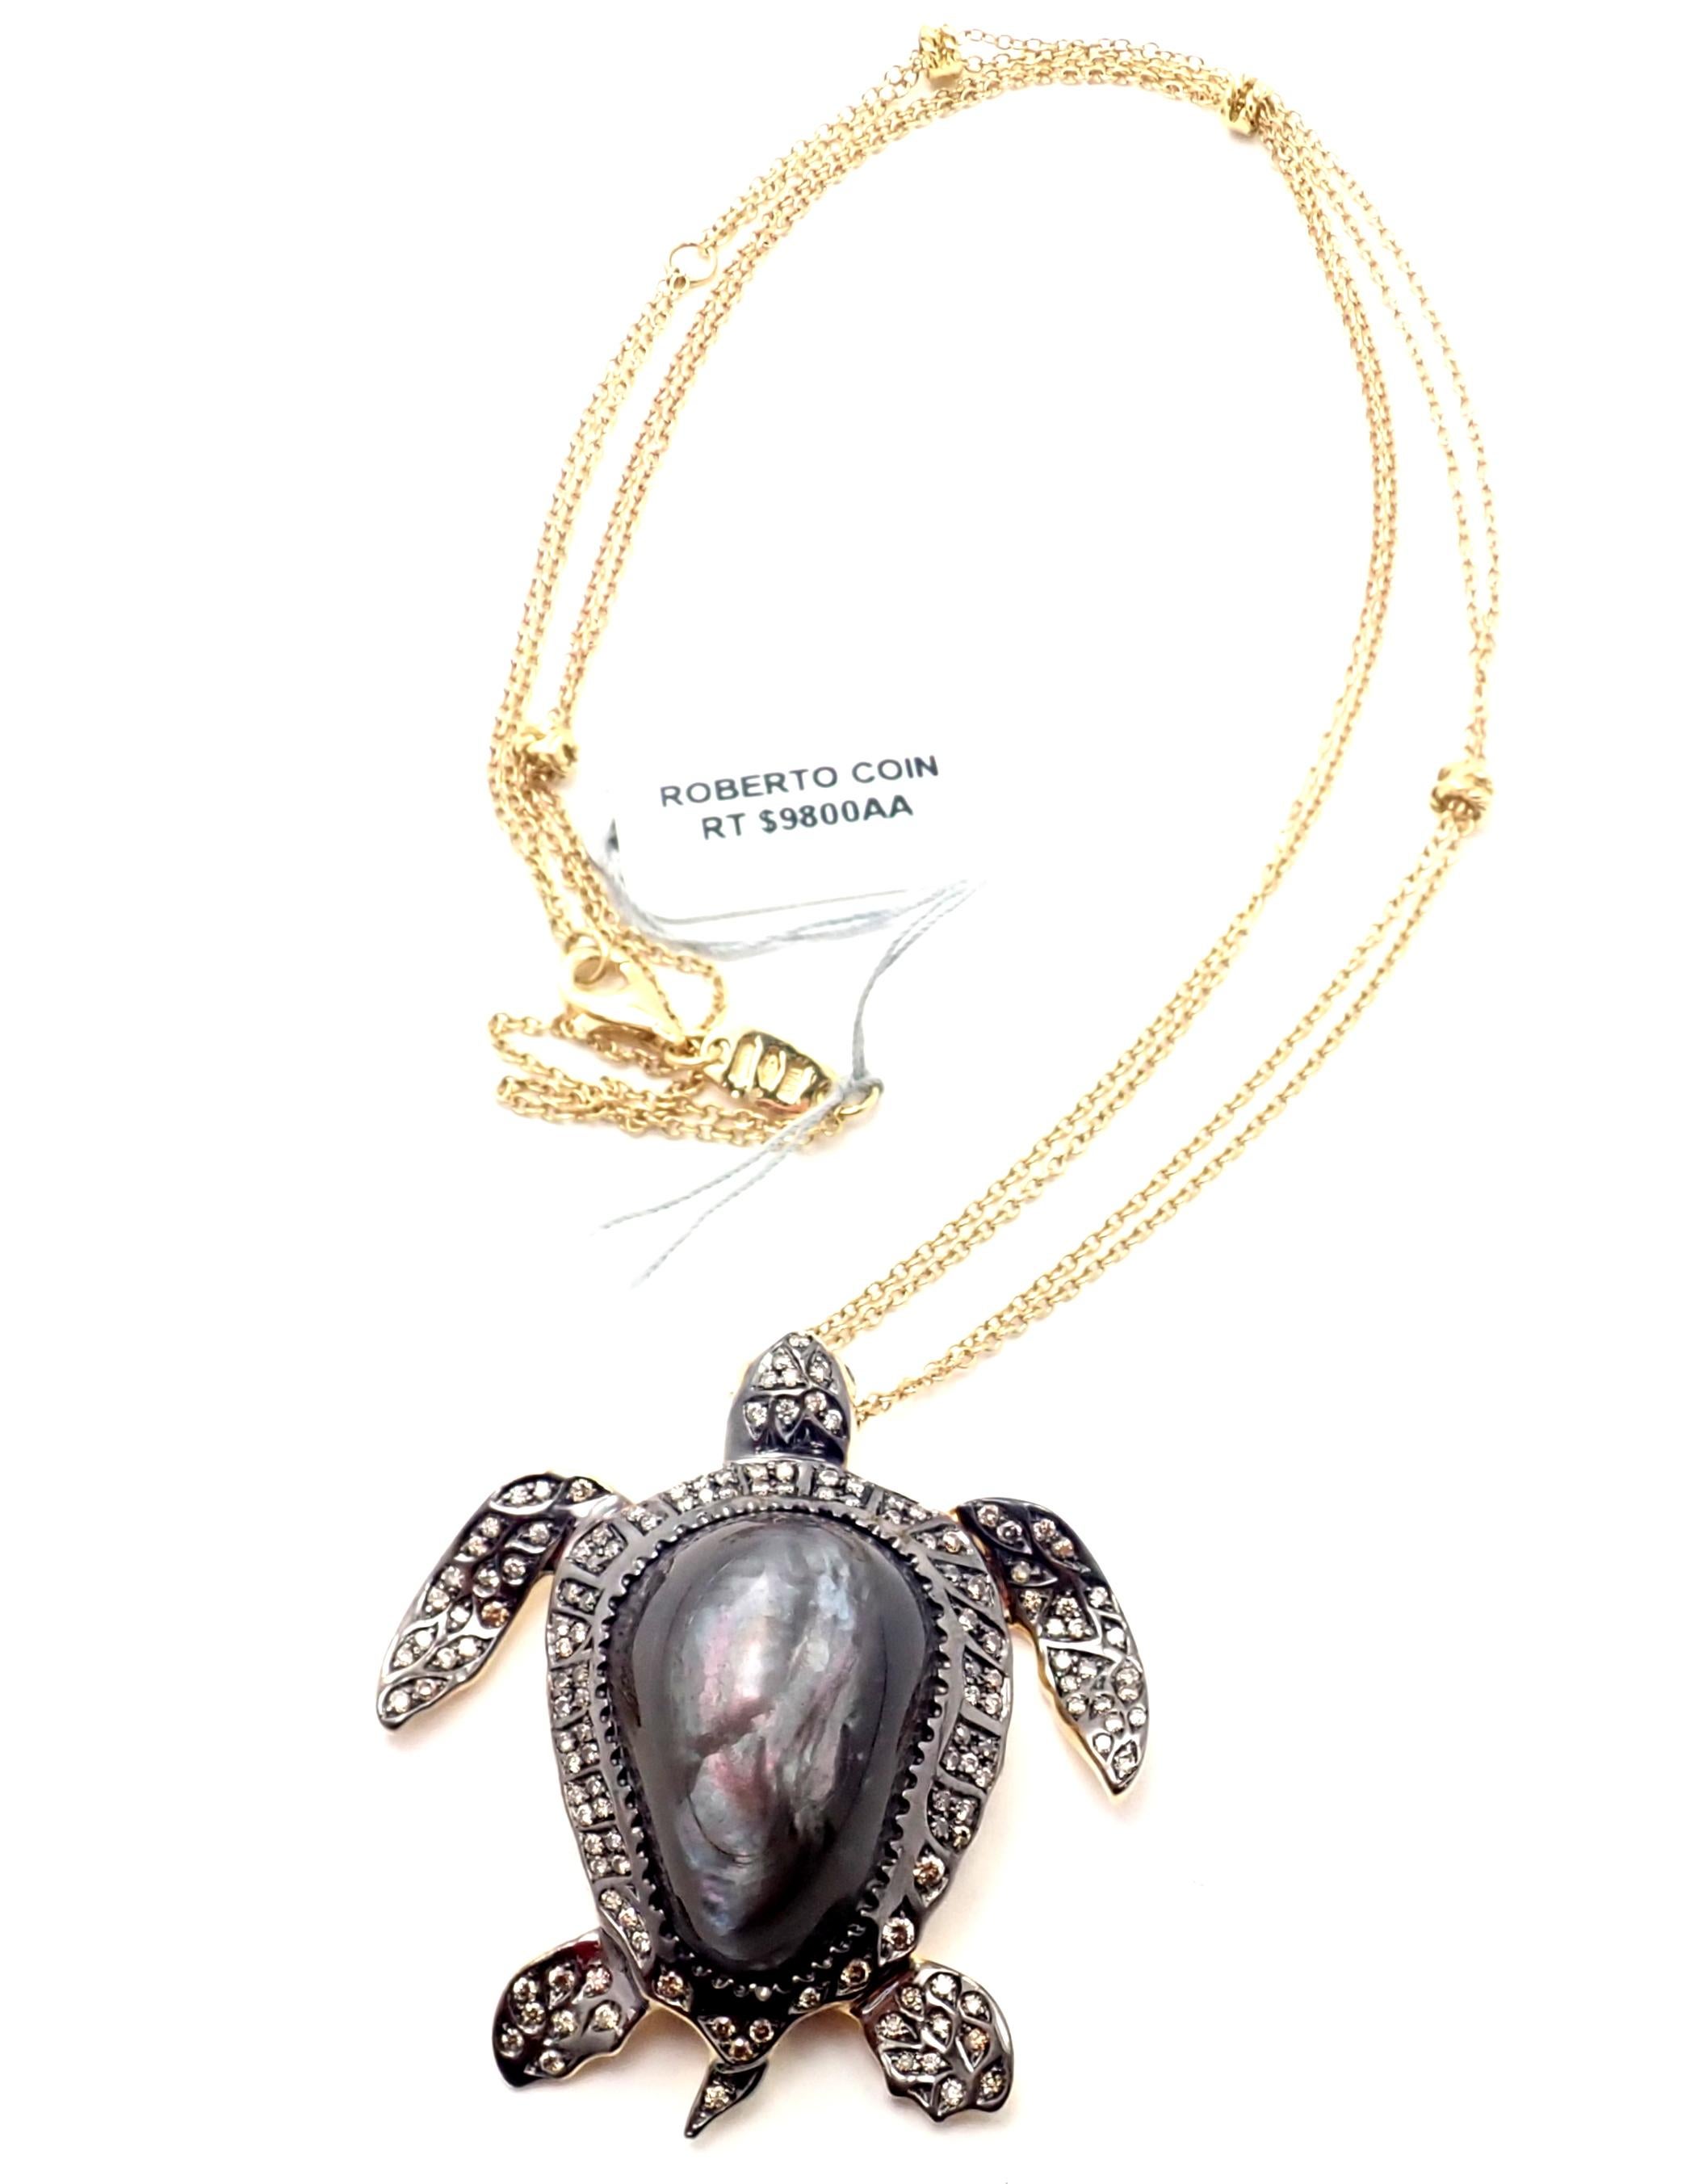 18k White Sea Turtle Diamond And Mother Of Pearl Pendant Necklace by Roberto Coin. 
With Round brilliant cut diamonds total weight approx. 1.07ct
2 Rubies one on a pendant second on a chain.
This necklace is in new condition and it comes with RC box